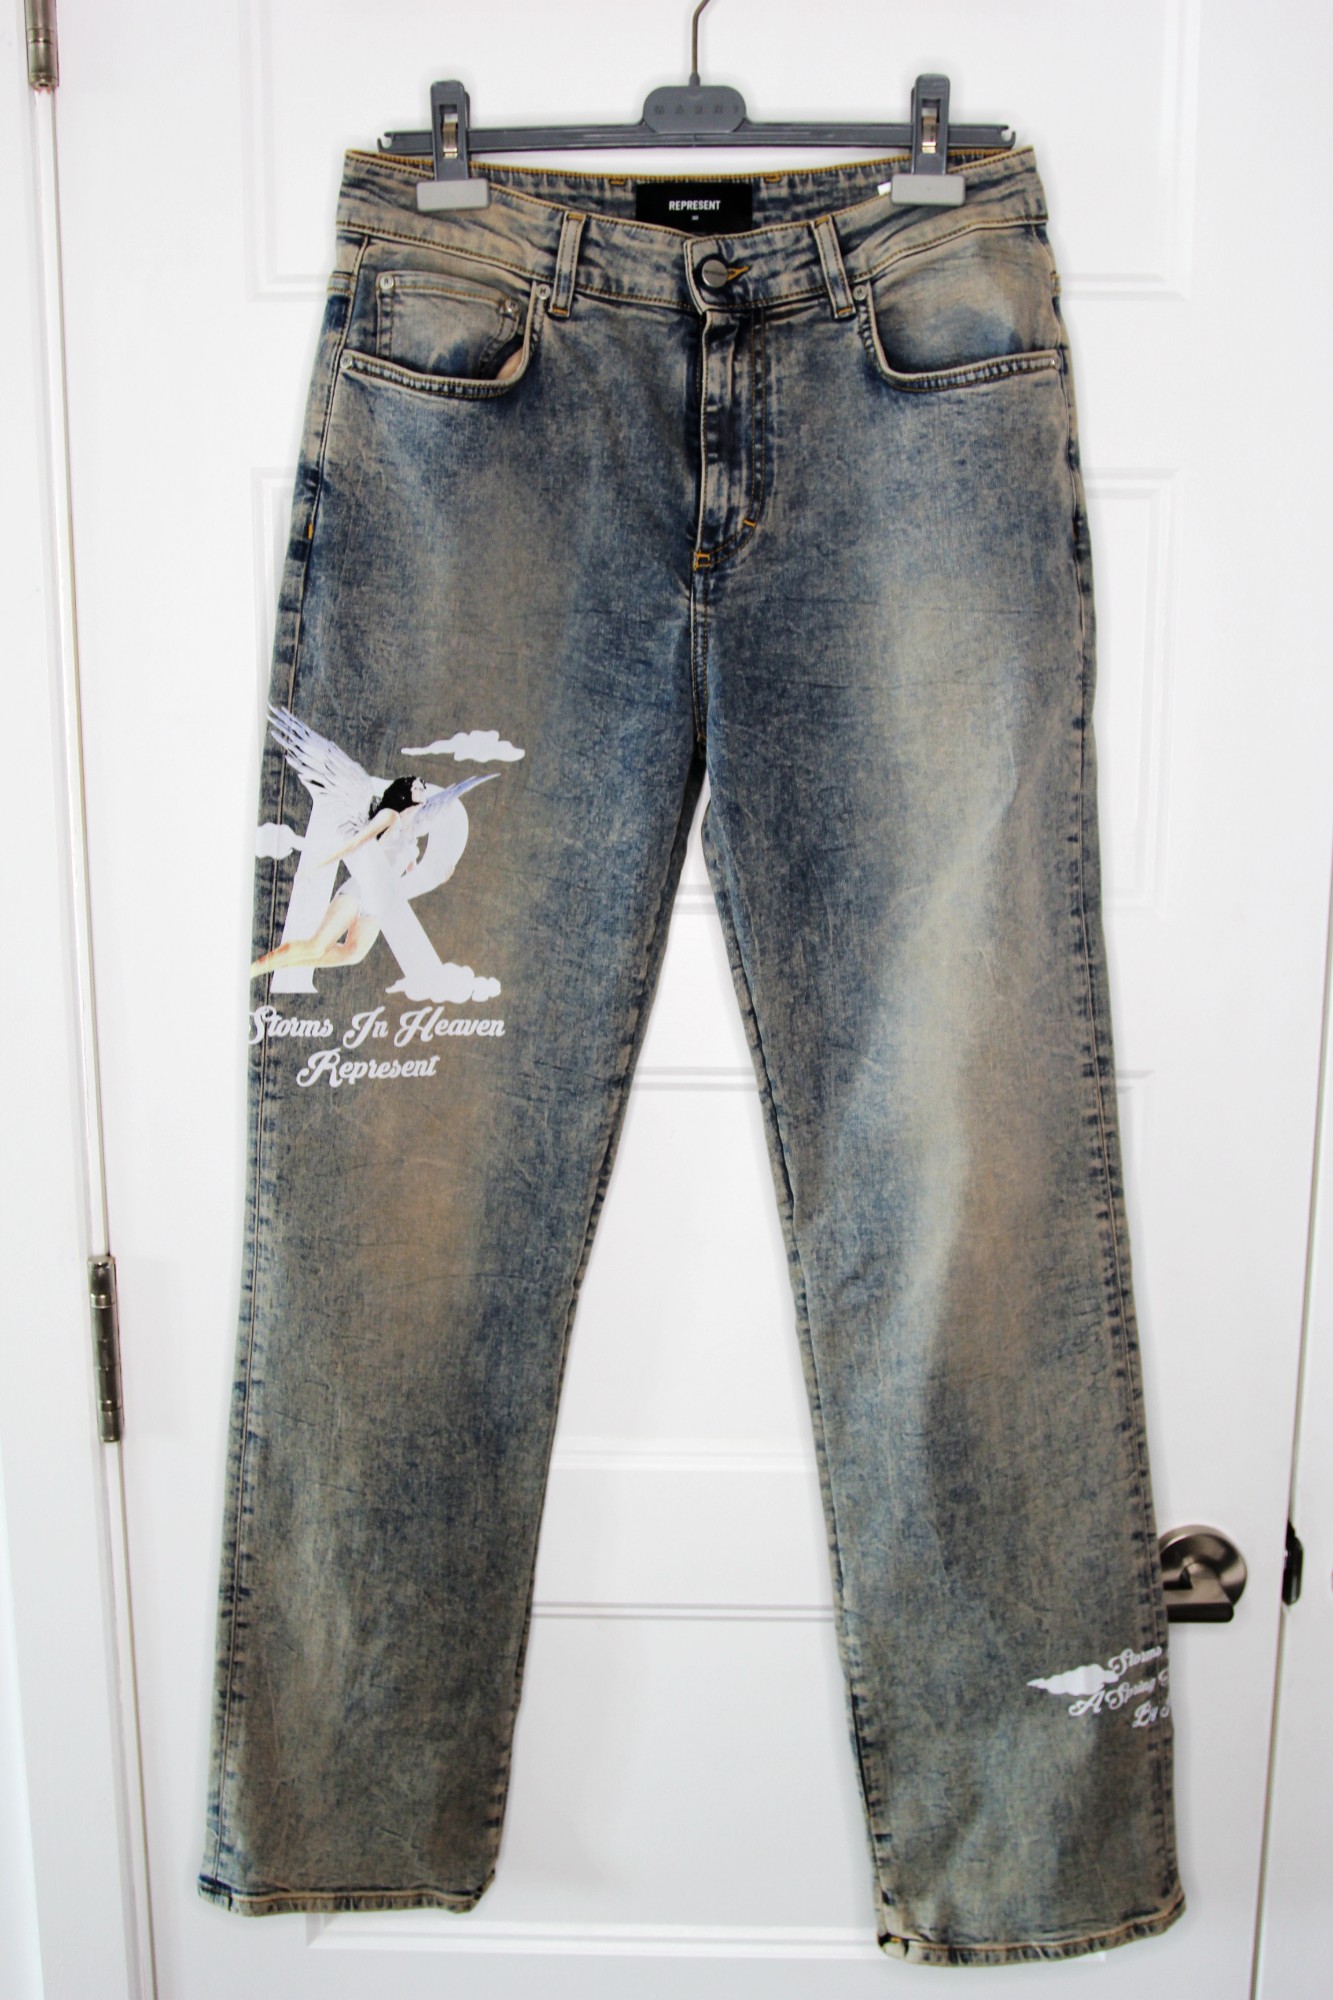 BNWT SS23 REPRESENT STORMS IN HEAVEAN JEANS 30 - 2